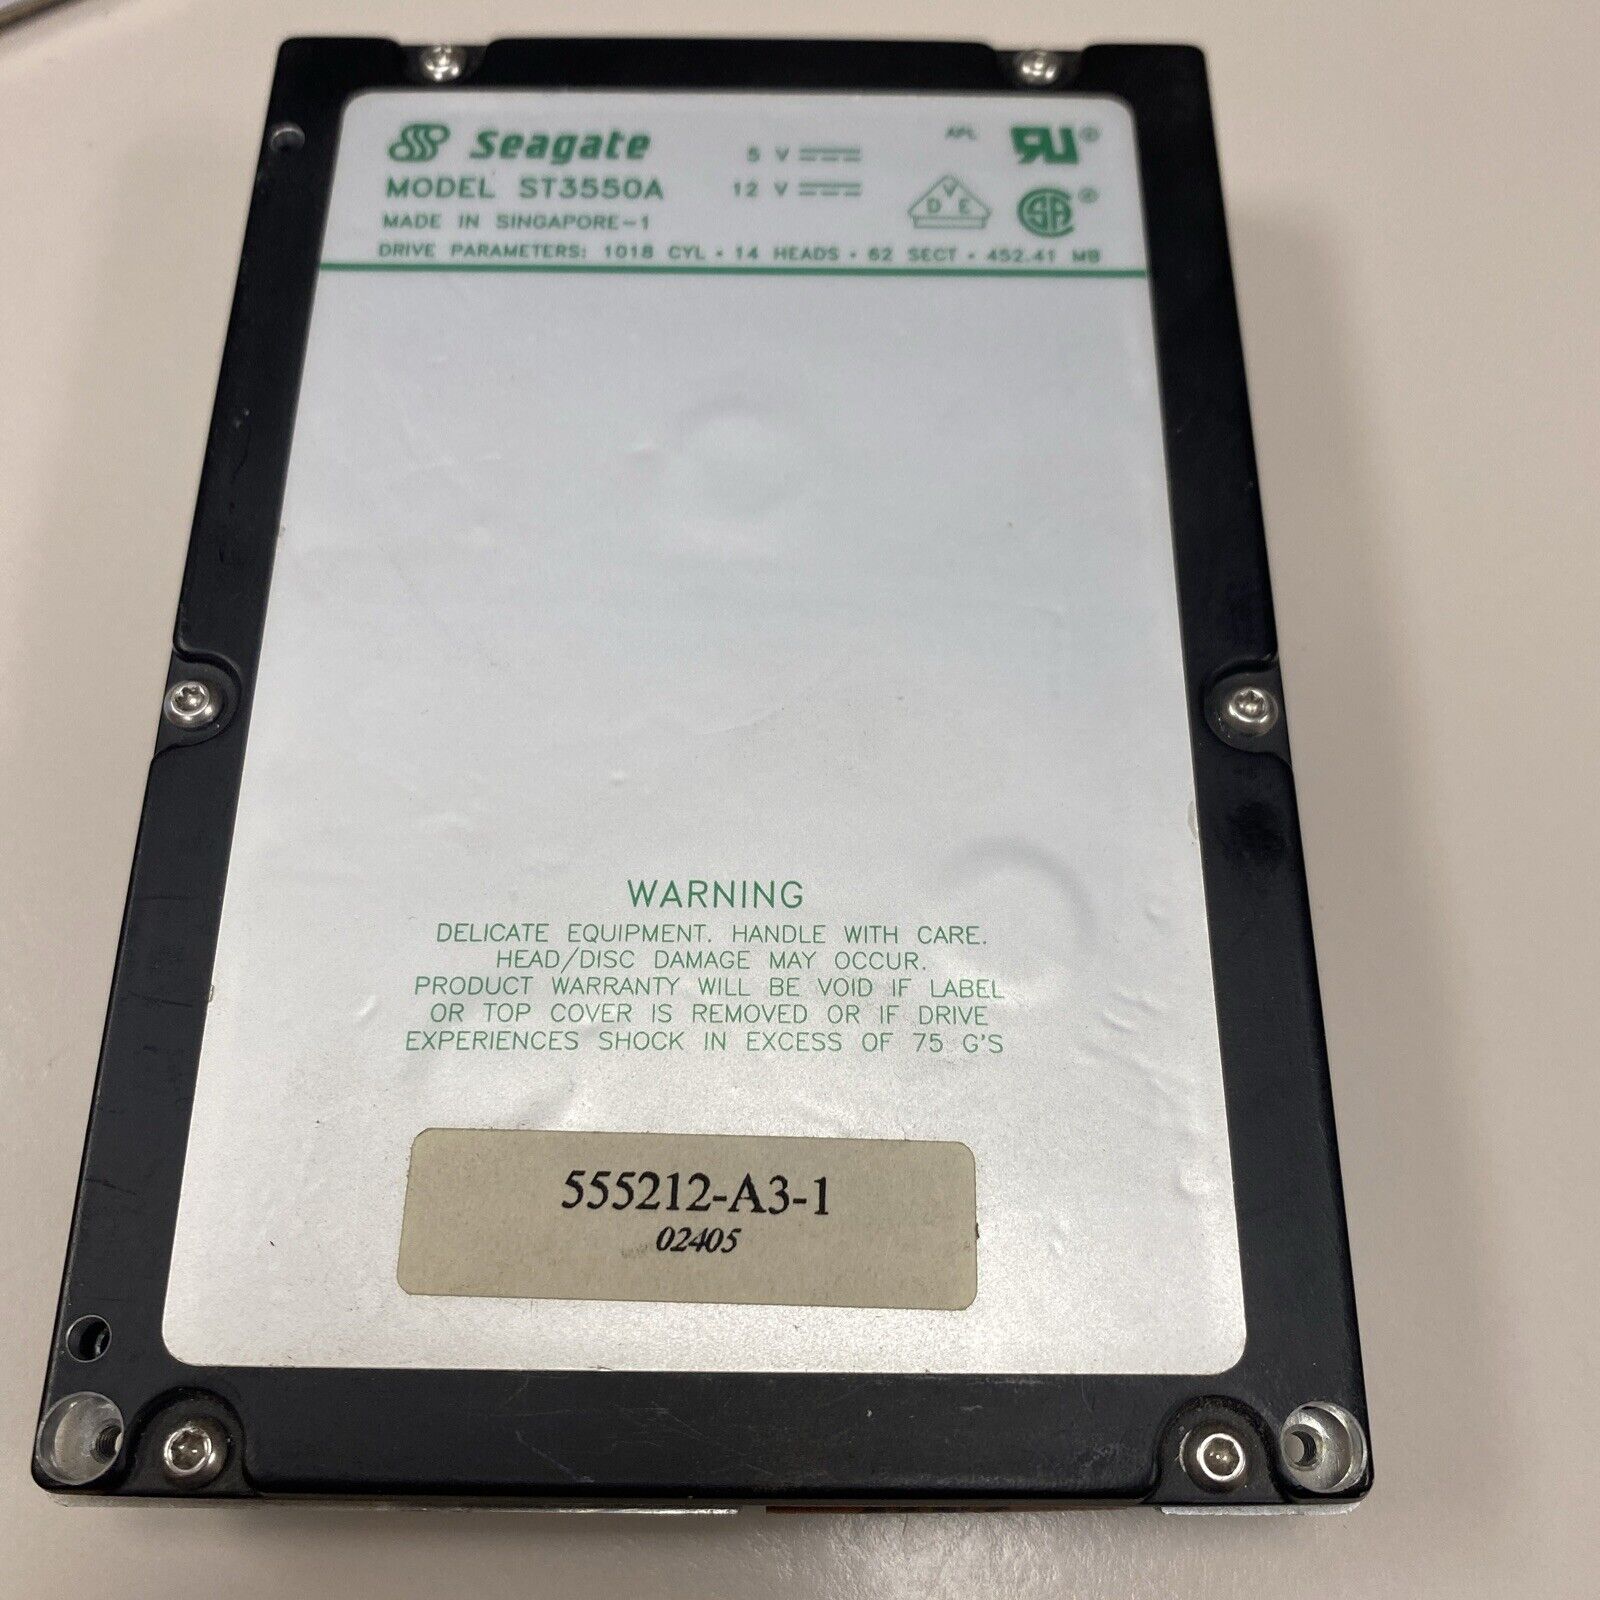 Vintage Seagate ST3550A 452.1 MB